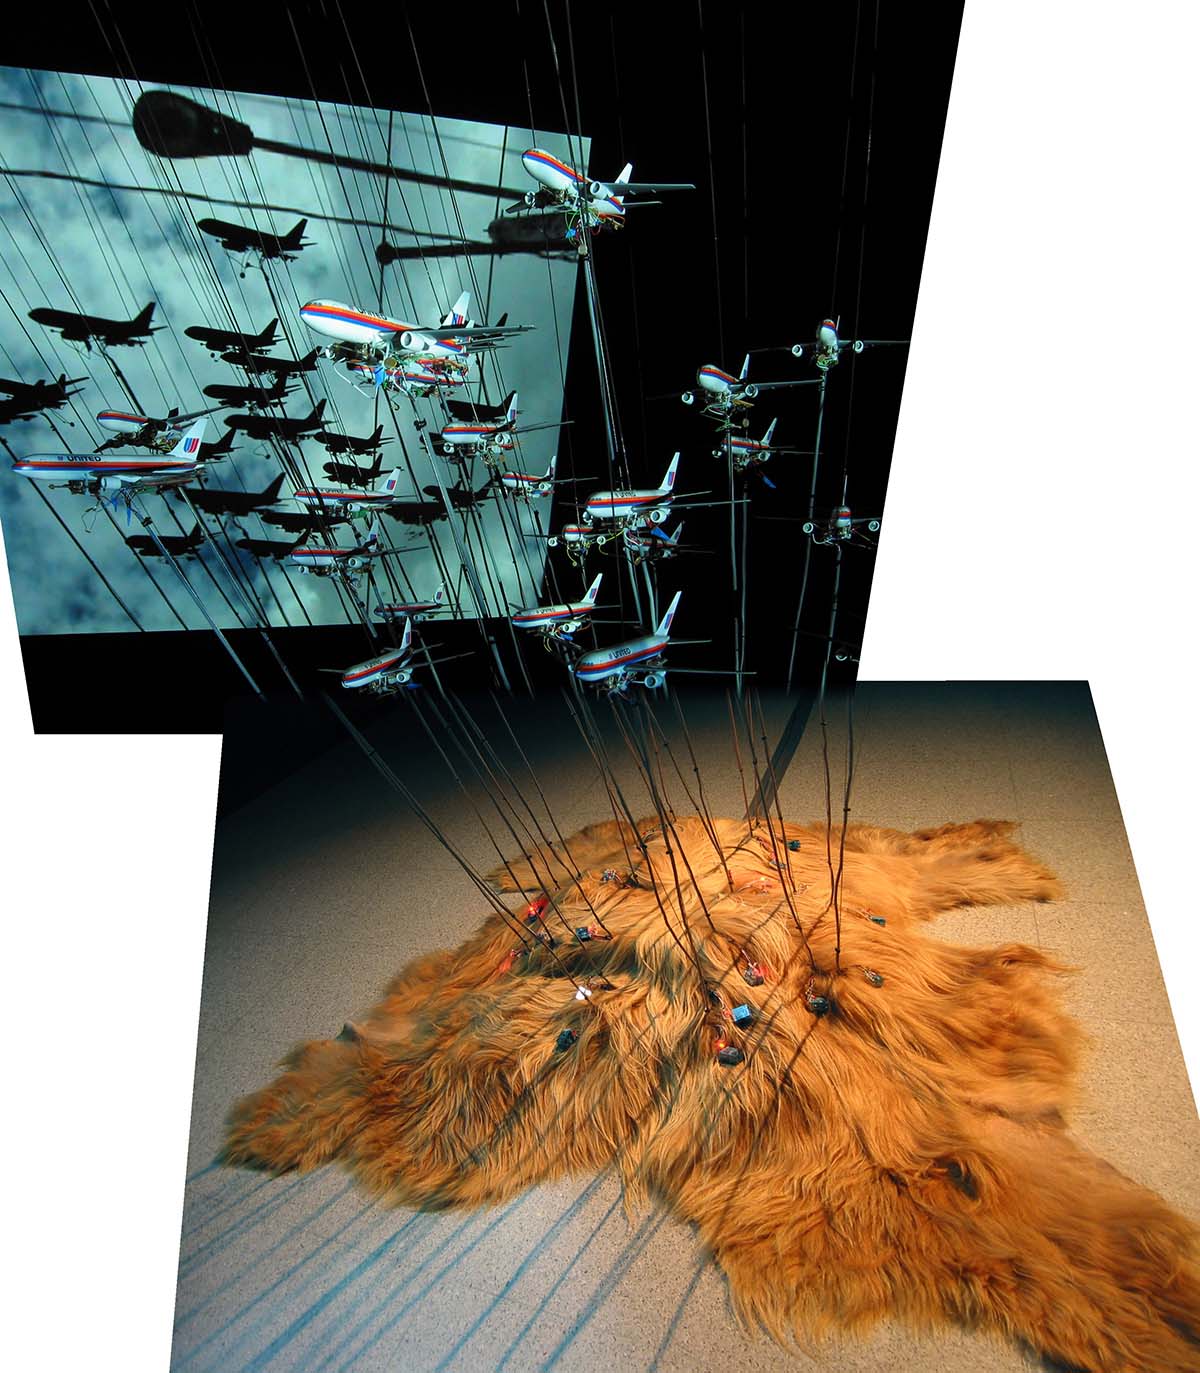 A video and electronic installation showing airplanes on long rods planted in a fur rug. 